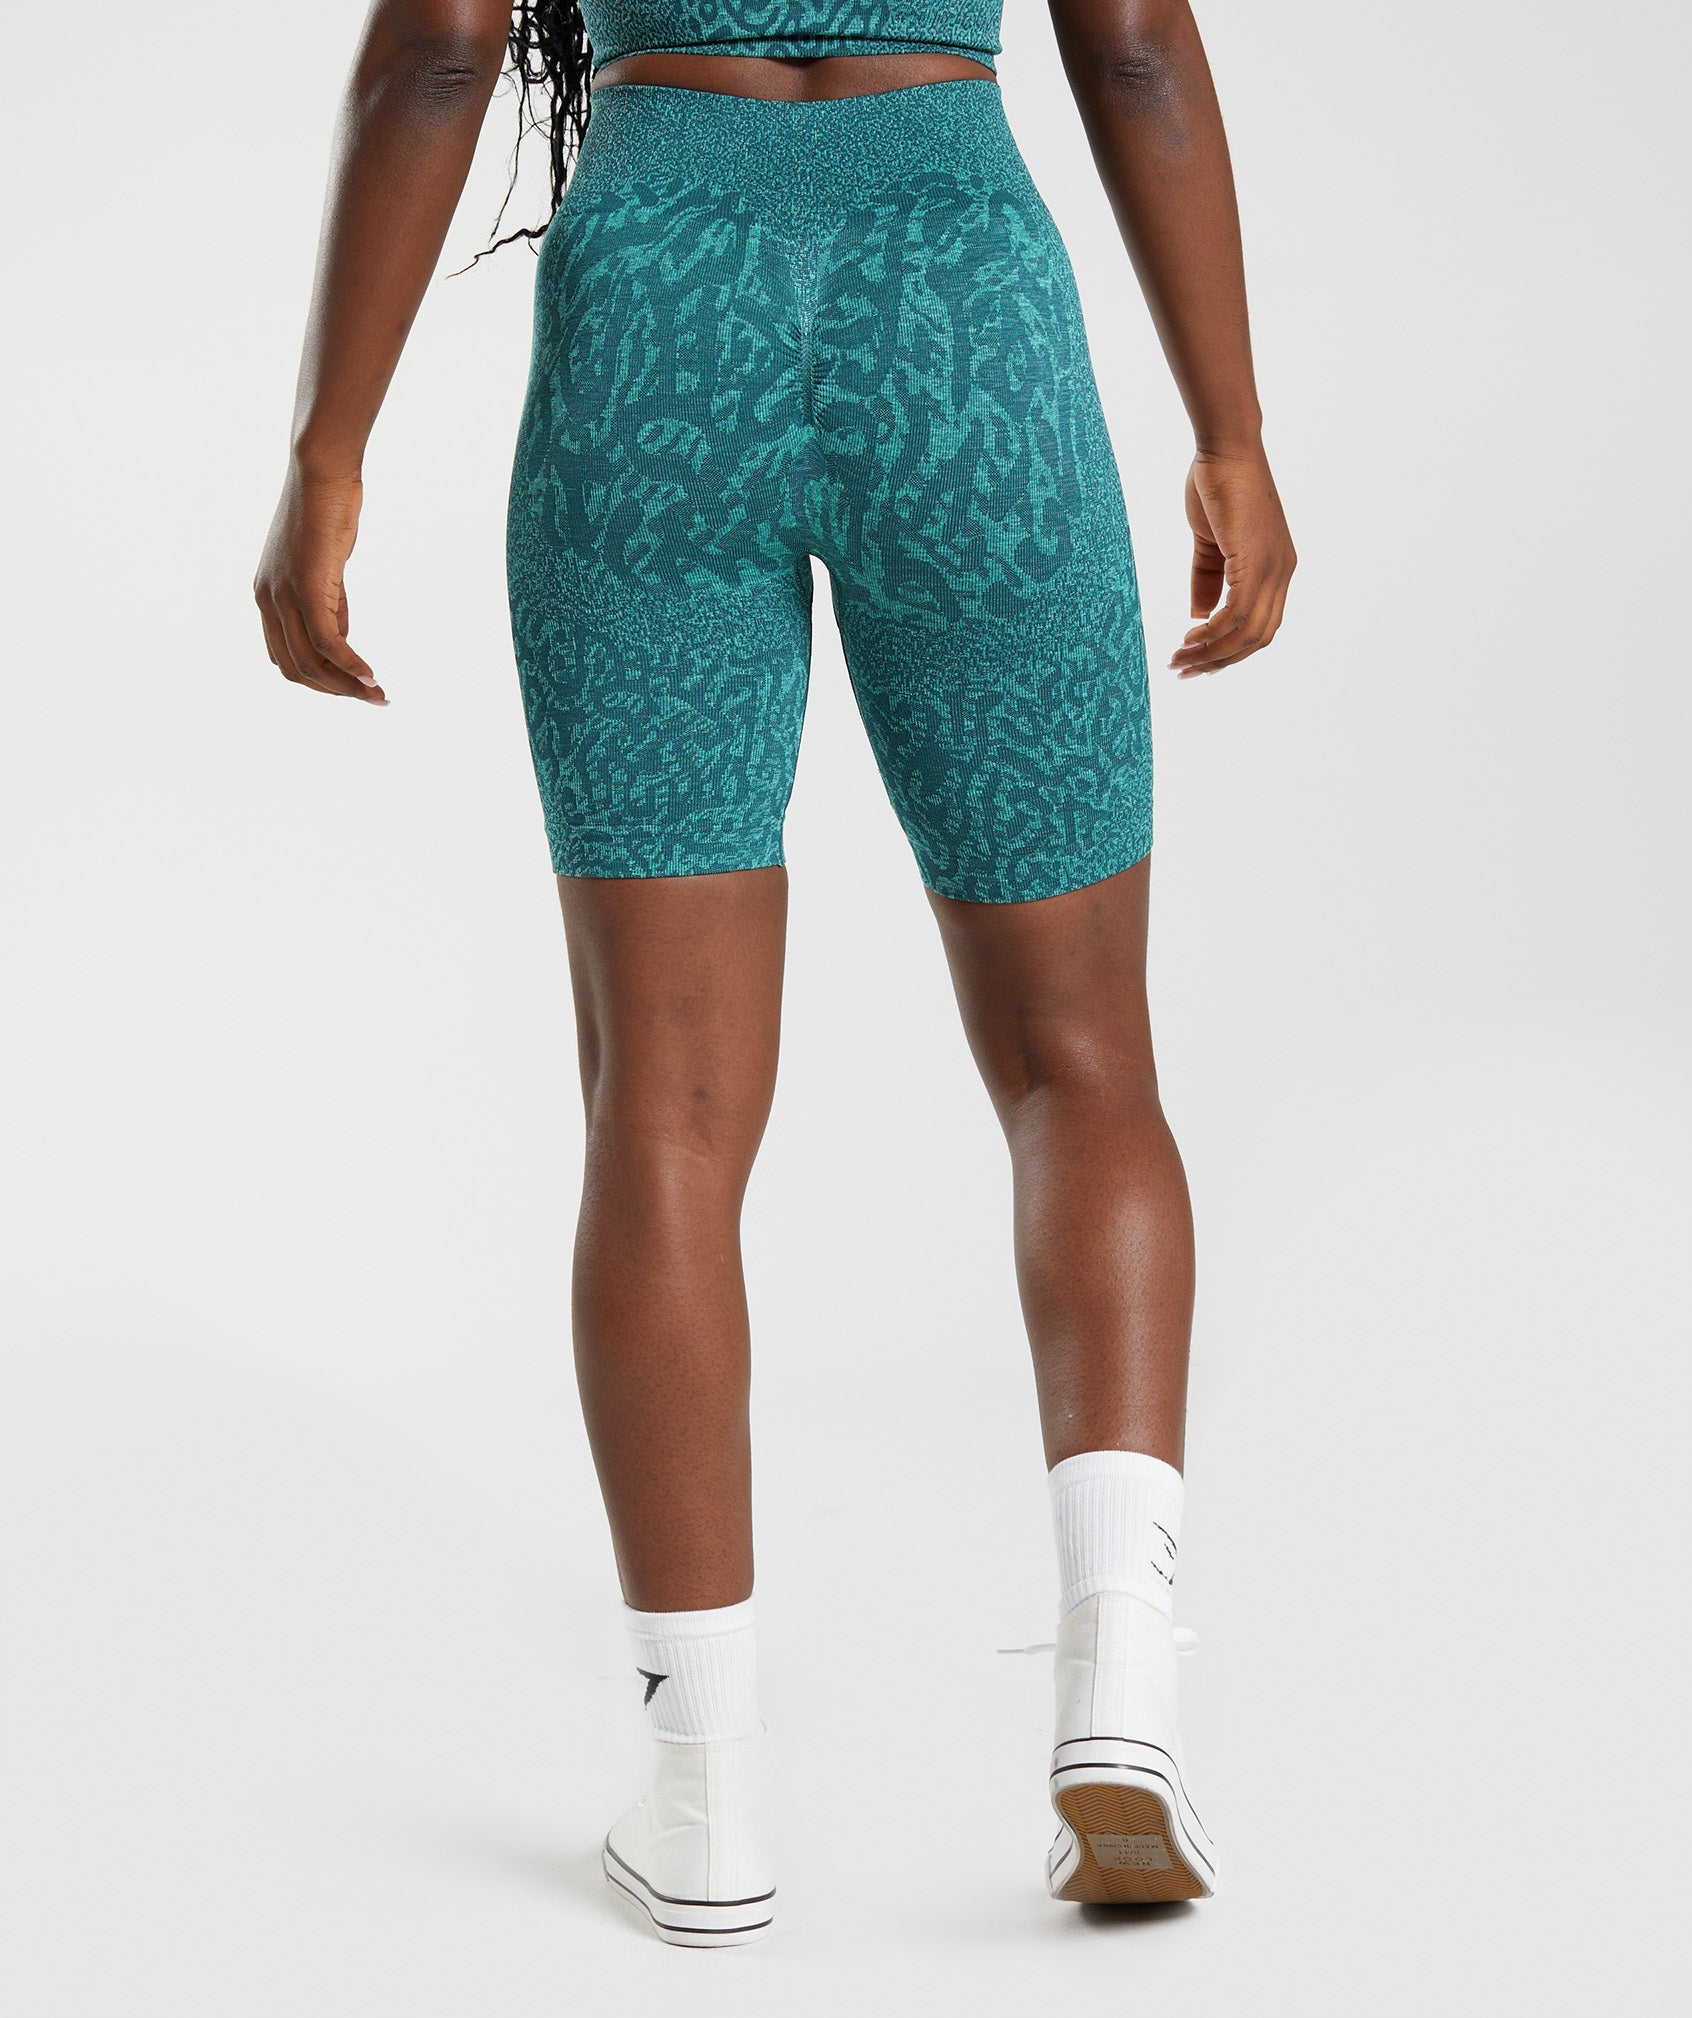 Adapt Animal Seamless Cycling Shorts in Reef | Winter Teal - view 3